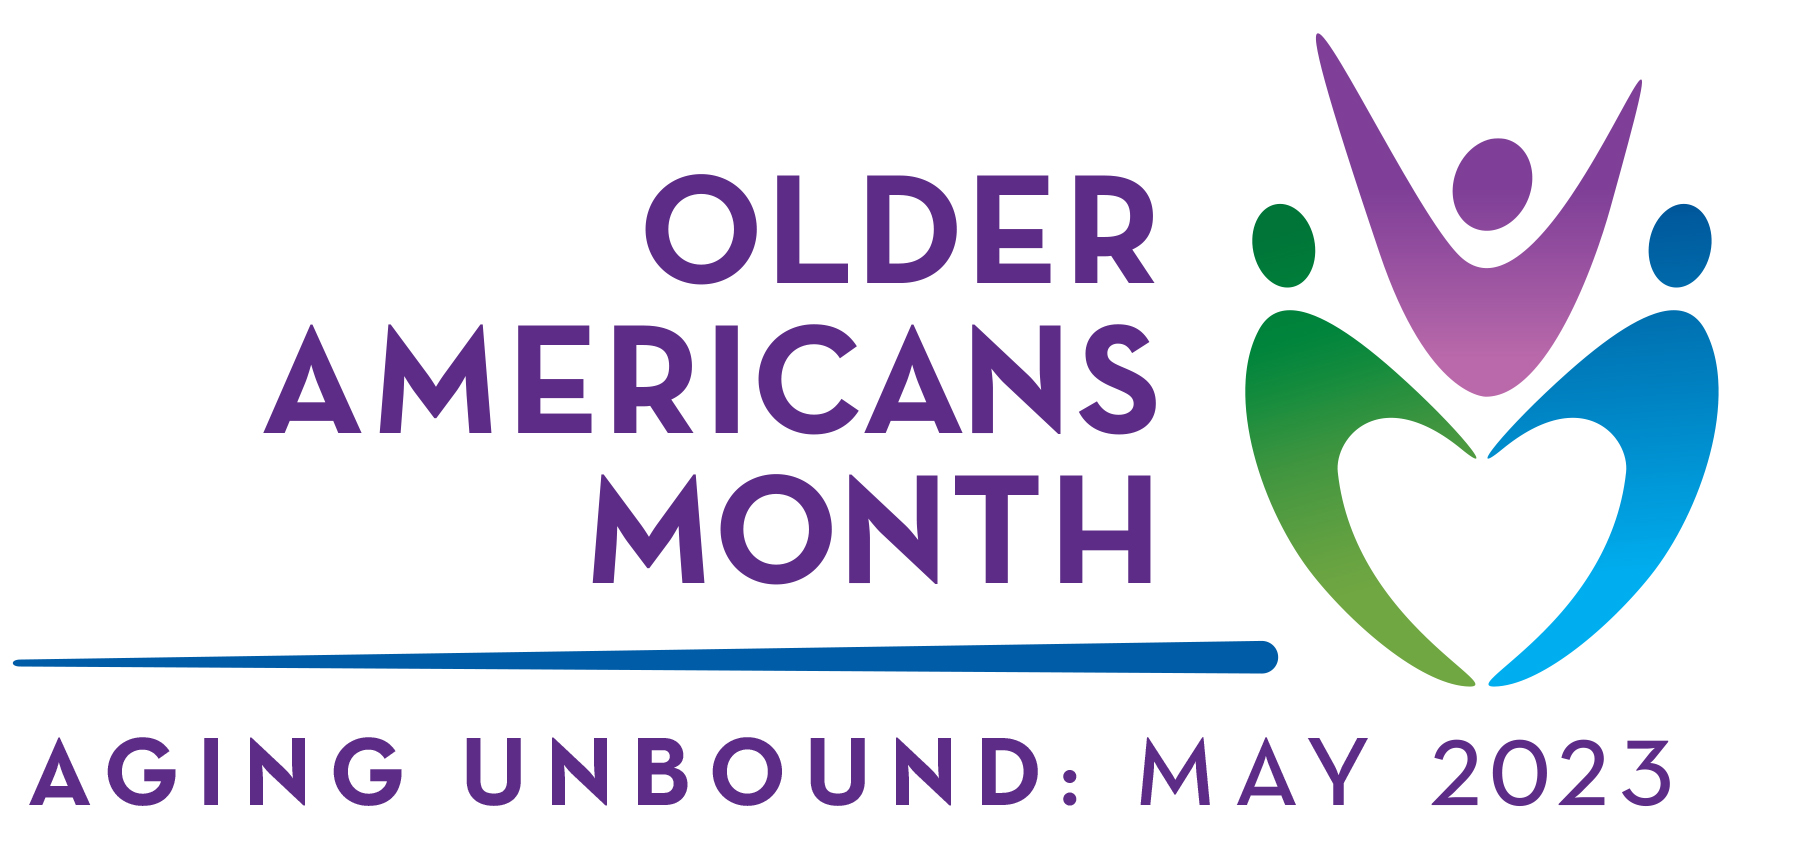 Older Americans Month May 2023: Aging Unbound.